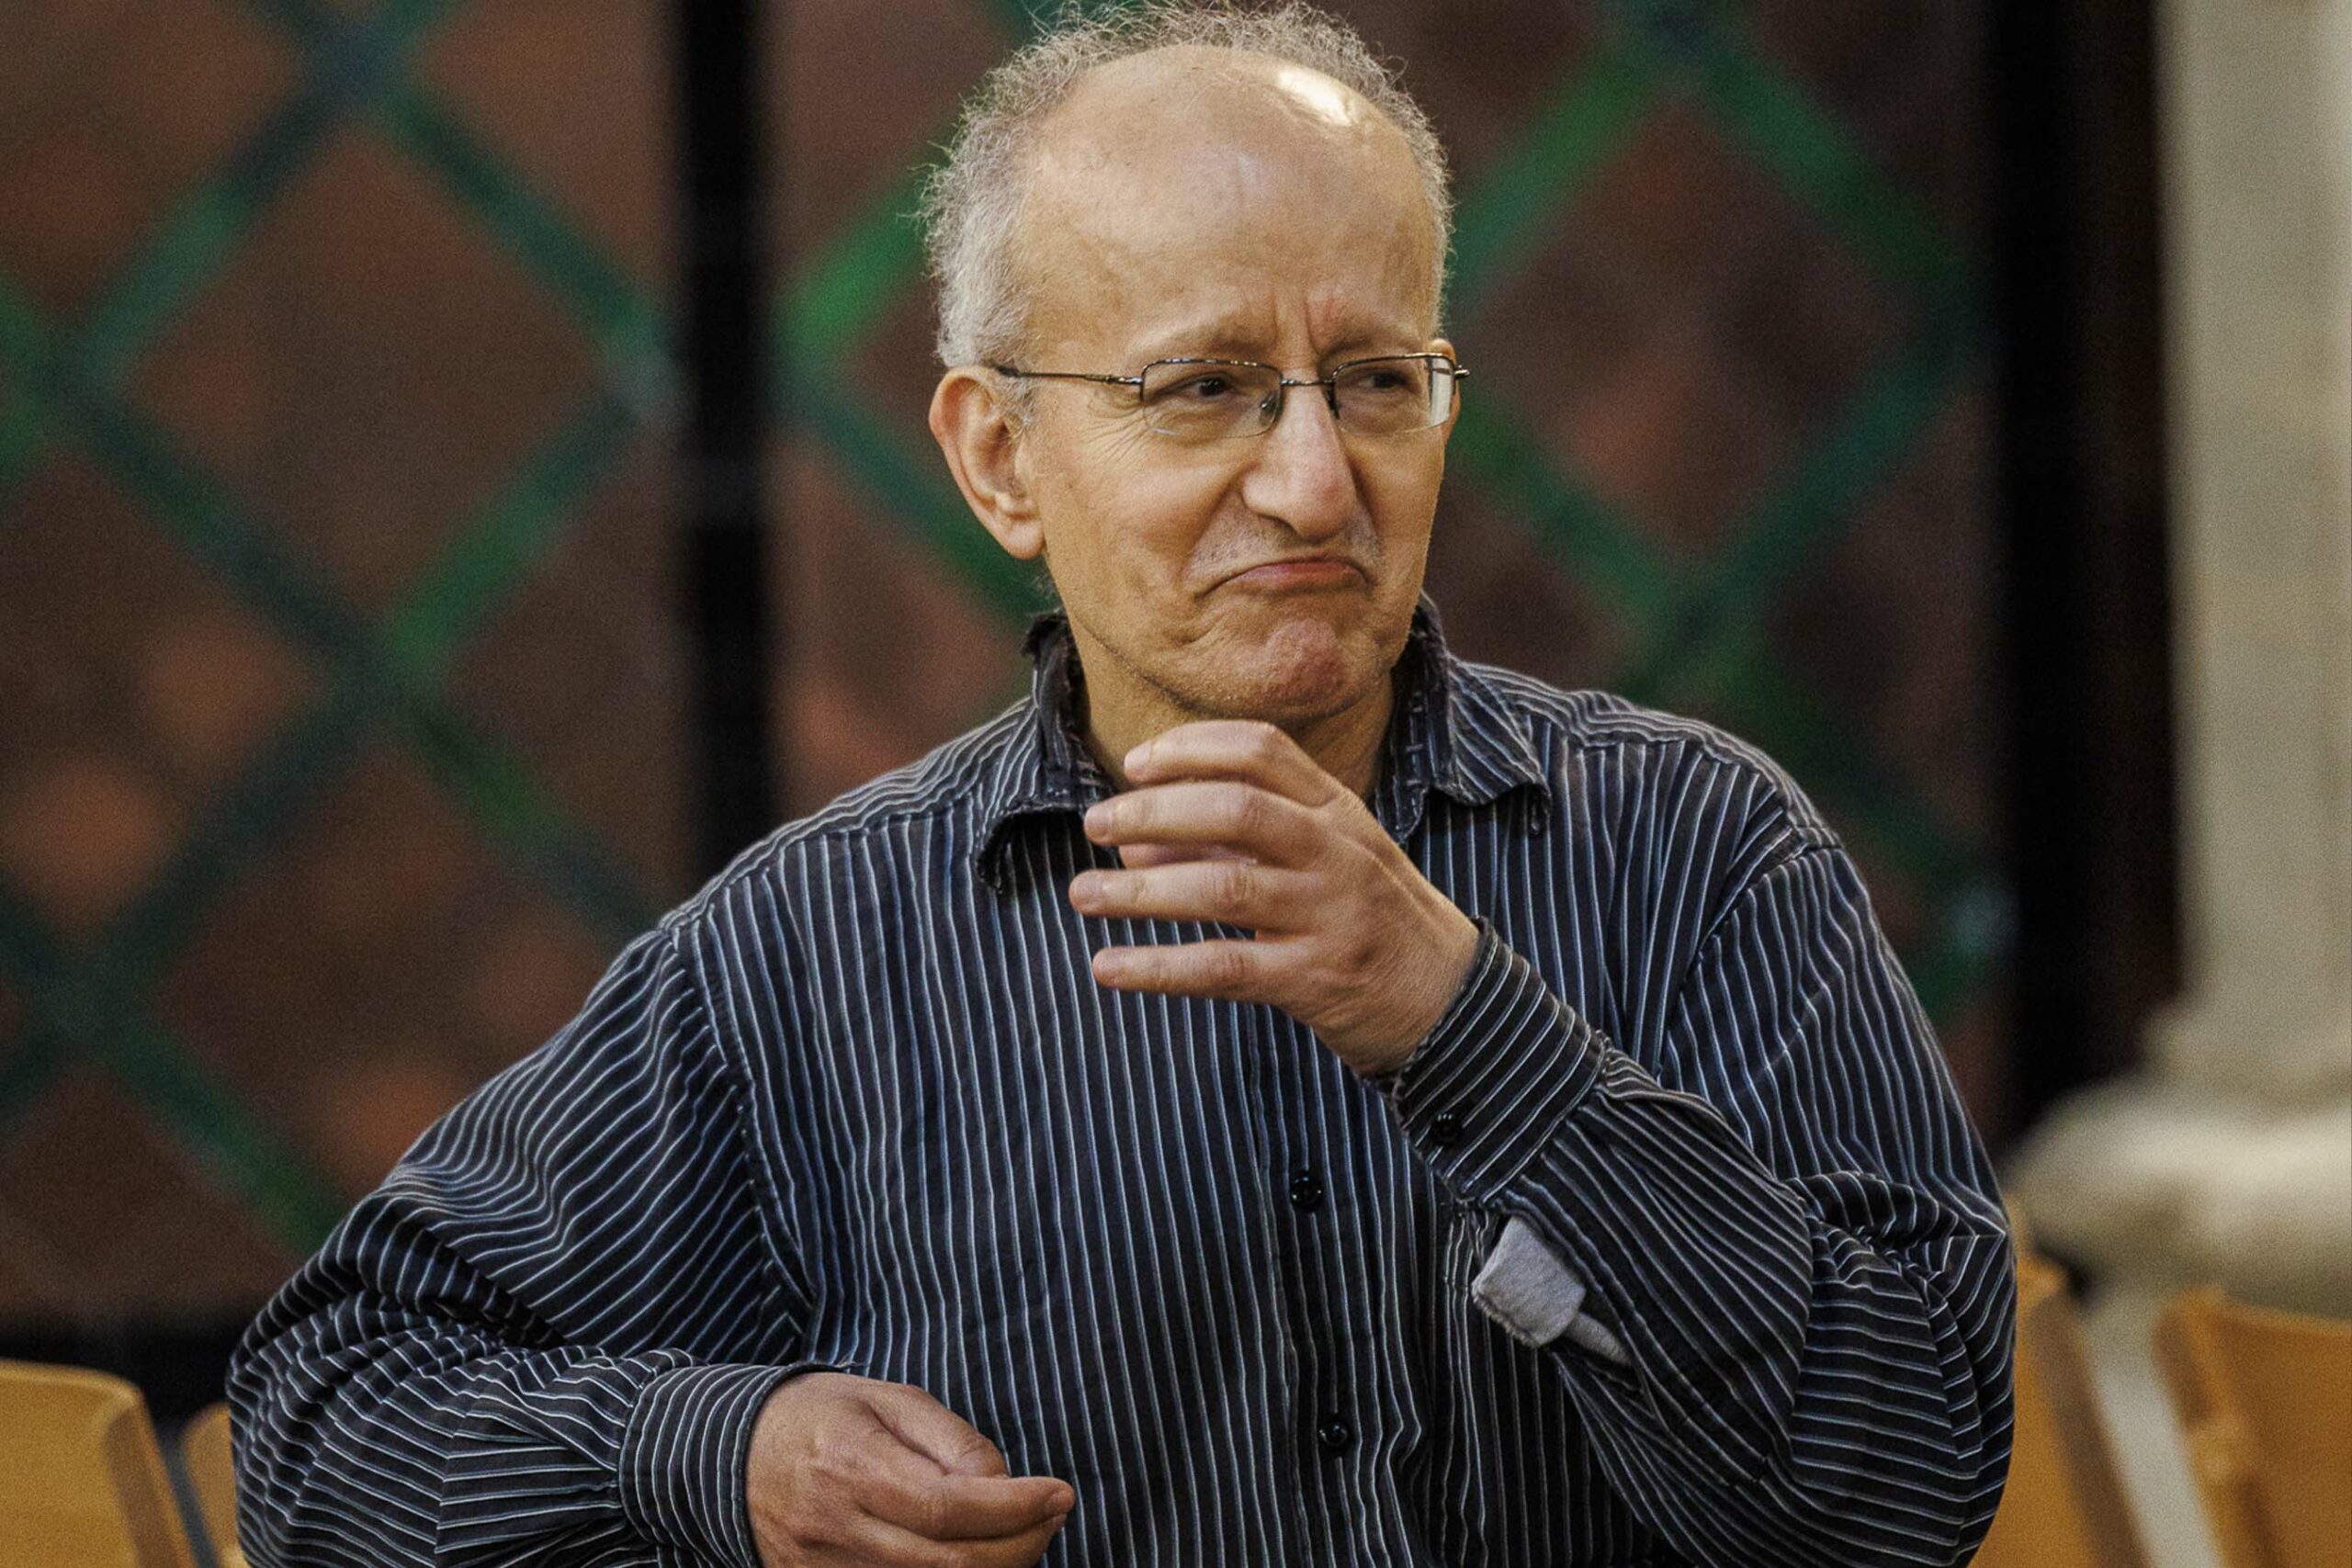 An elderly man wearing glasses and a striped shirt